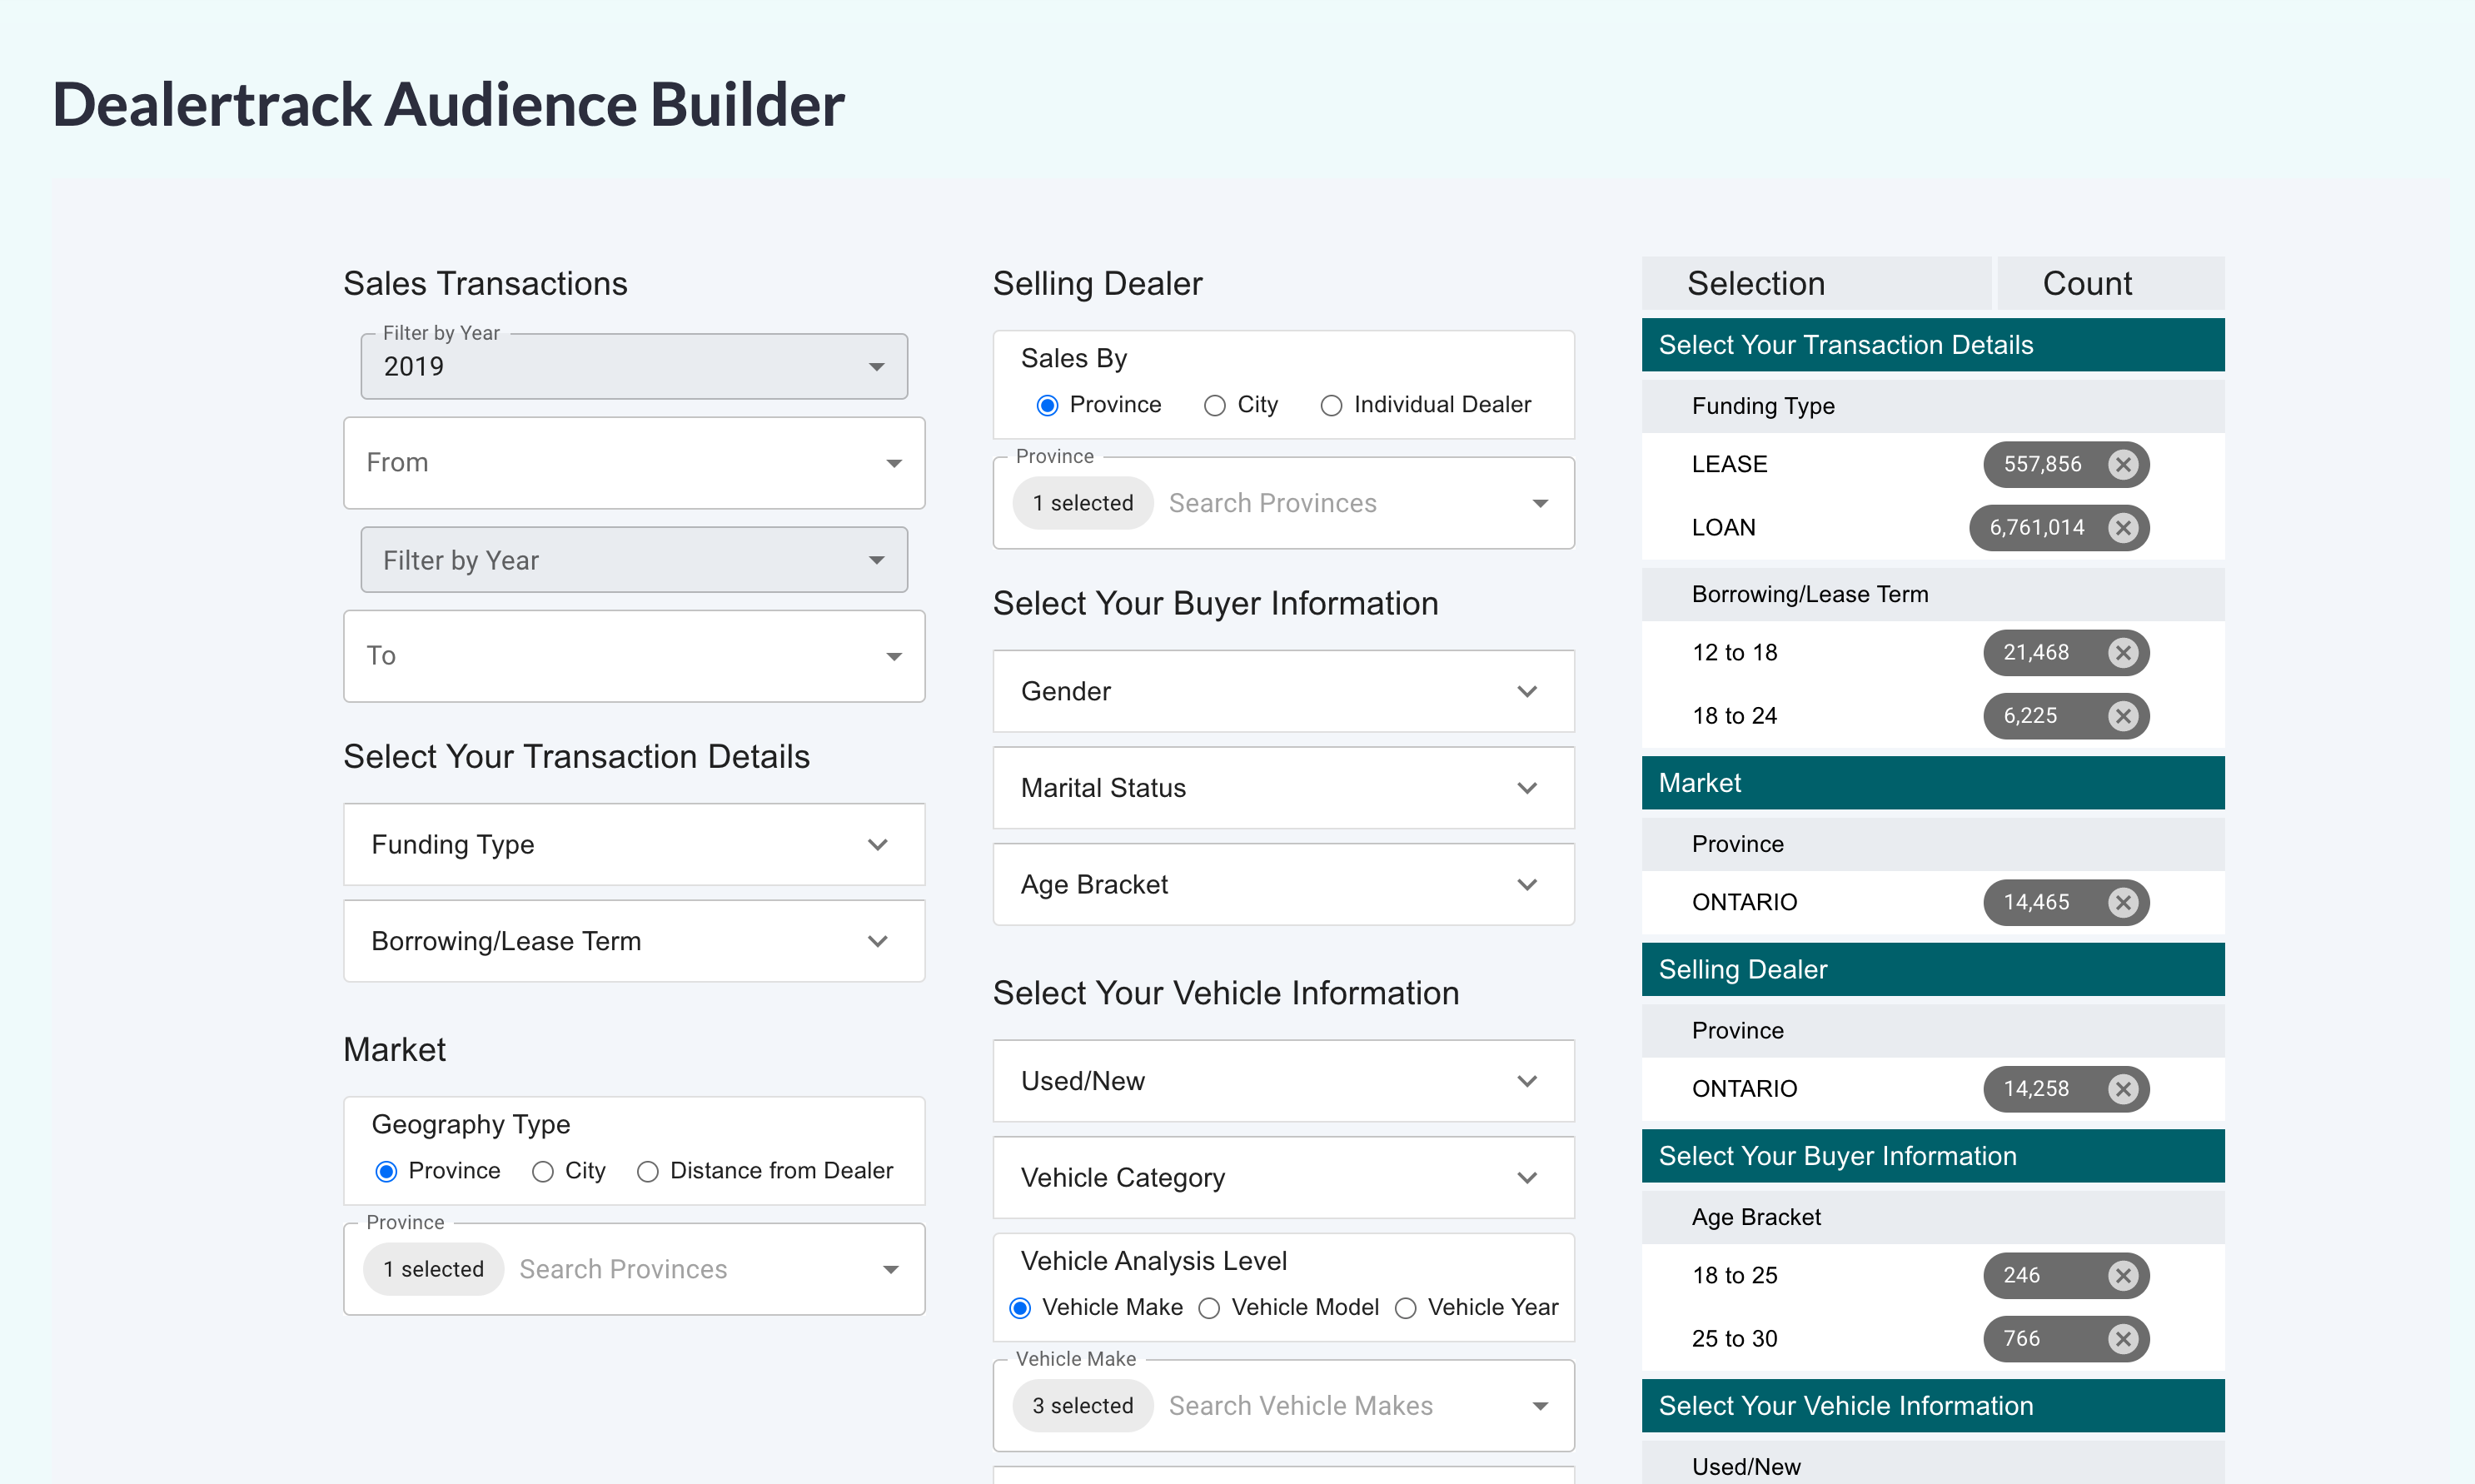 A new intelligentVIEW audience builder tool for marketers to build, profile, and target audiences by using real Canadian vehicle sales data from Dealertrack.